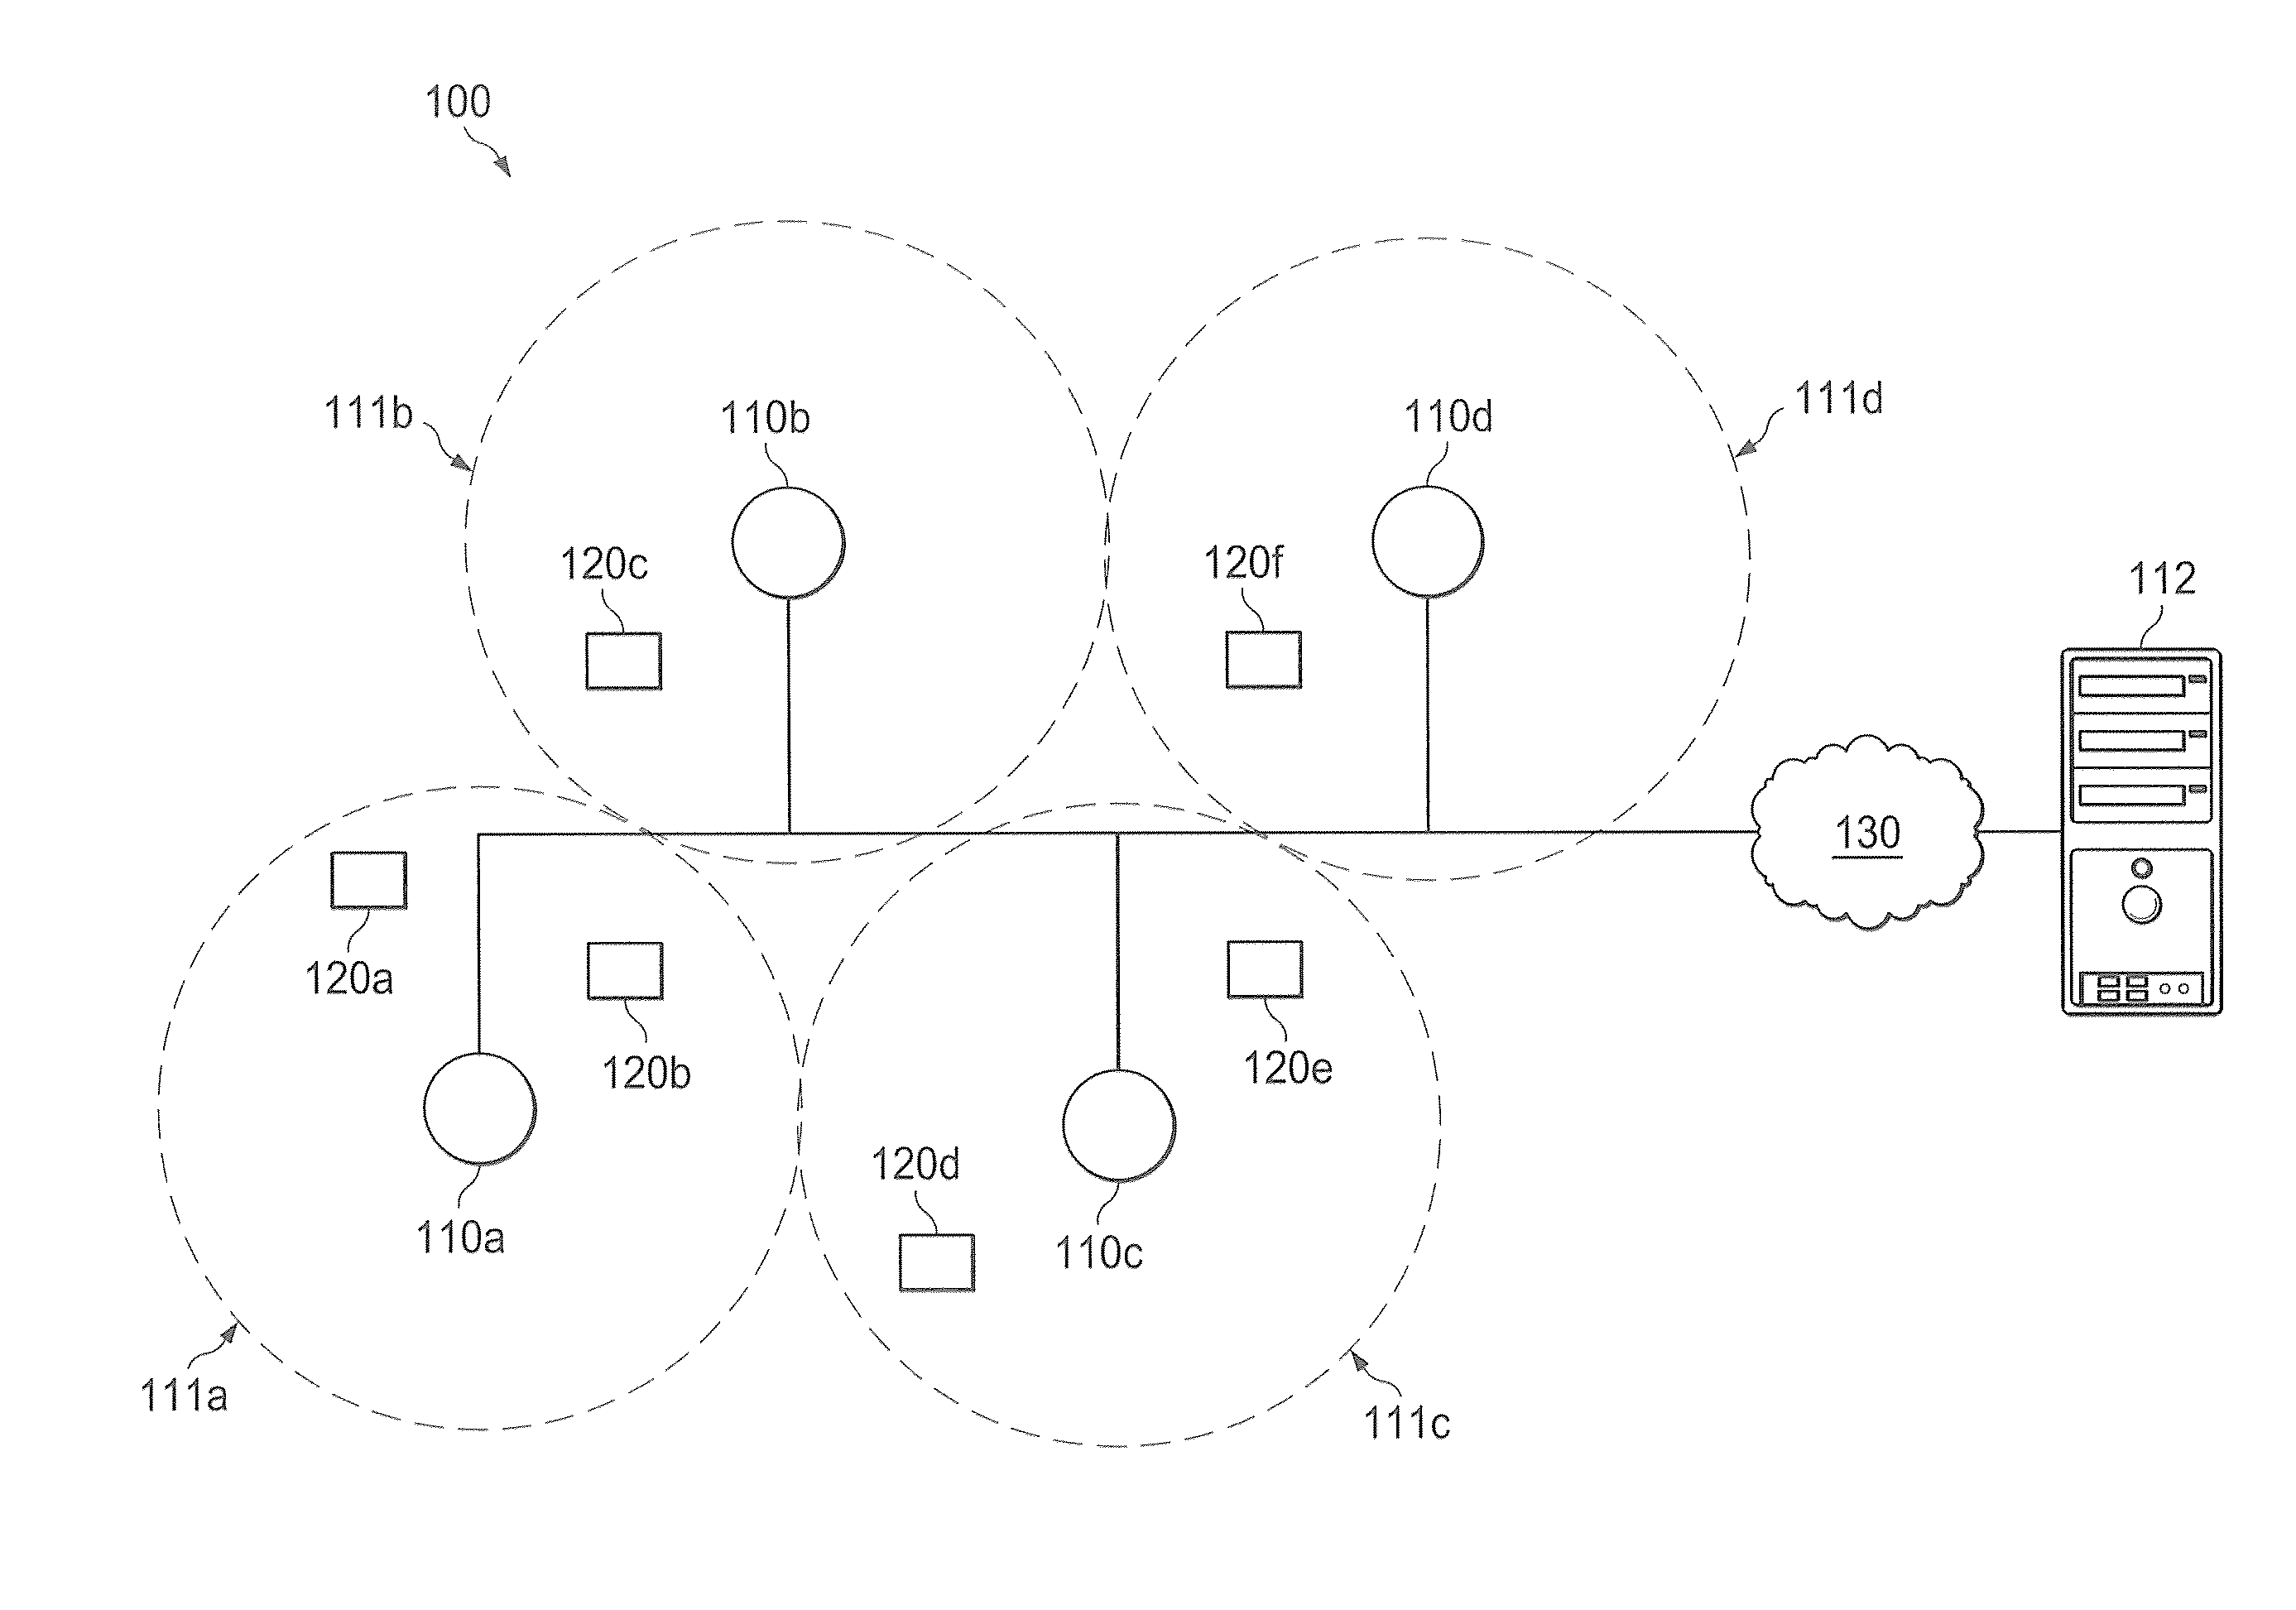 Systems and methods for mitigating interference between access points